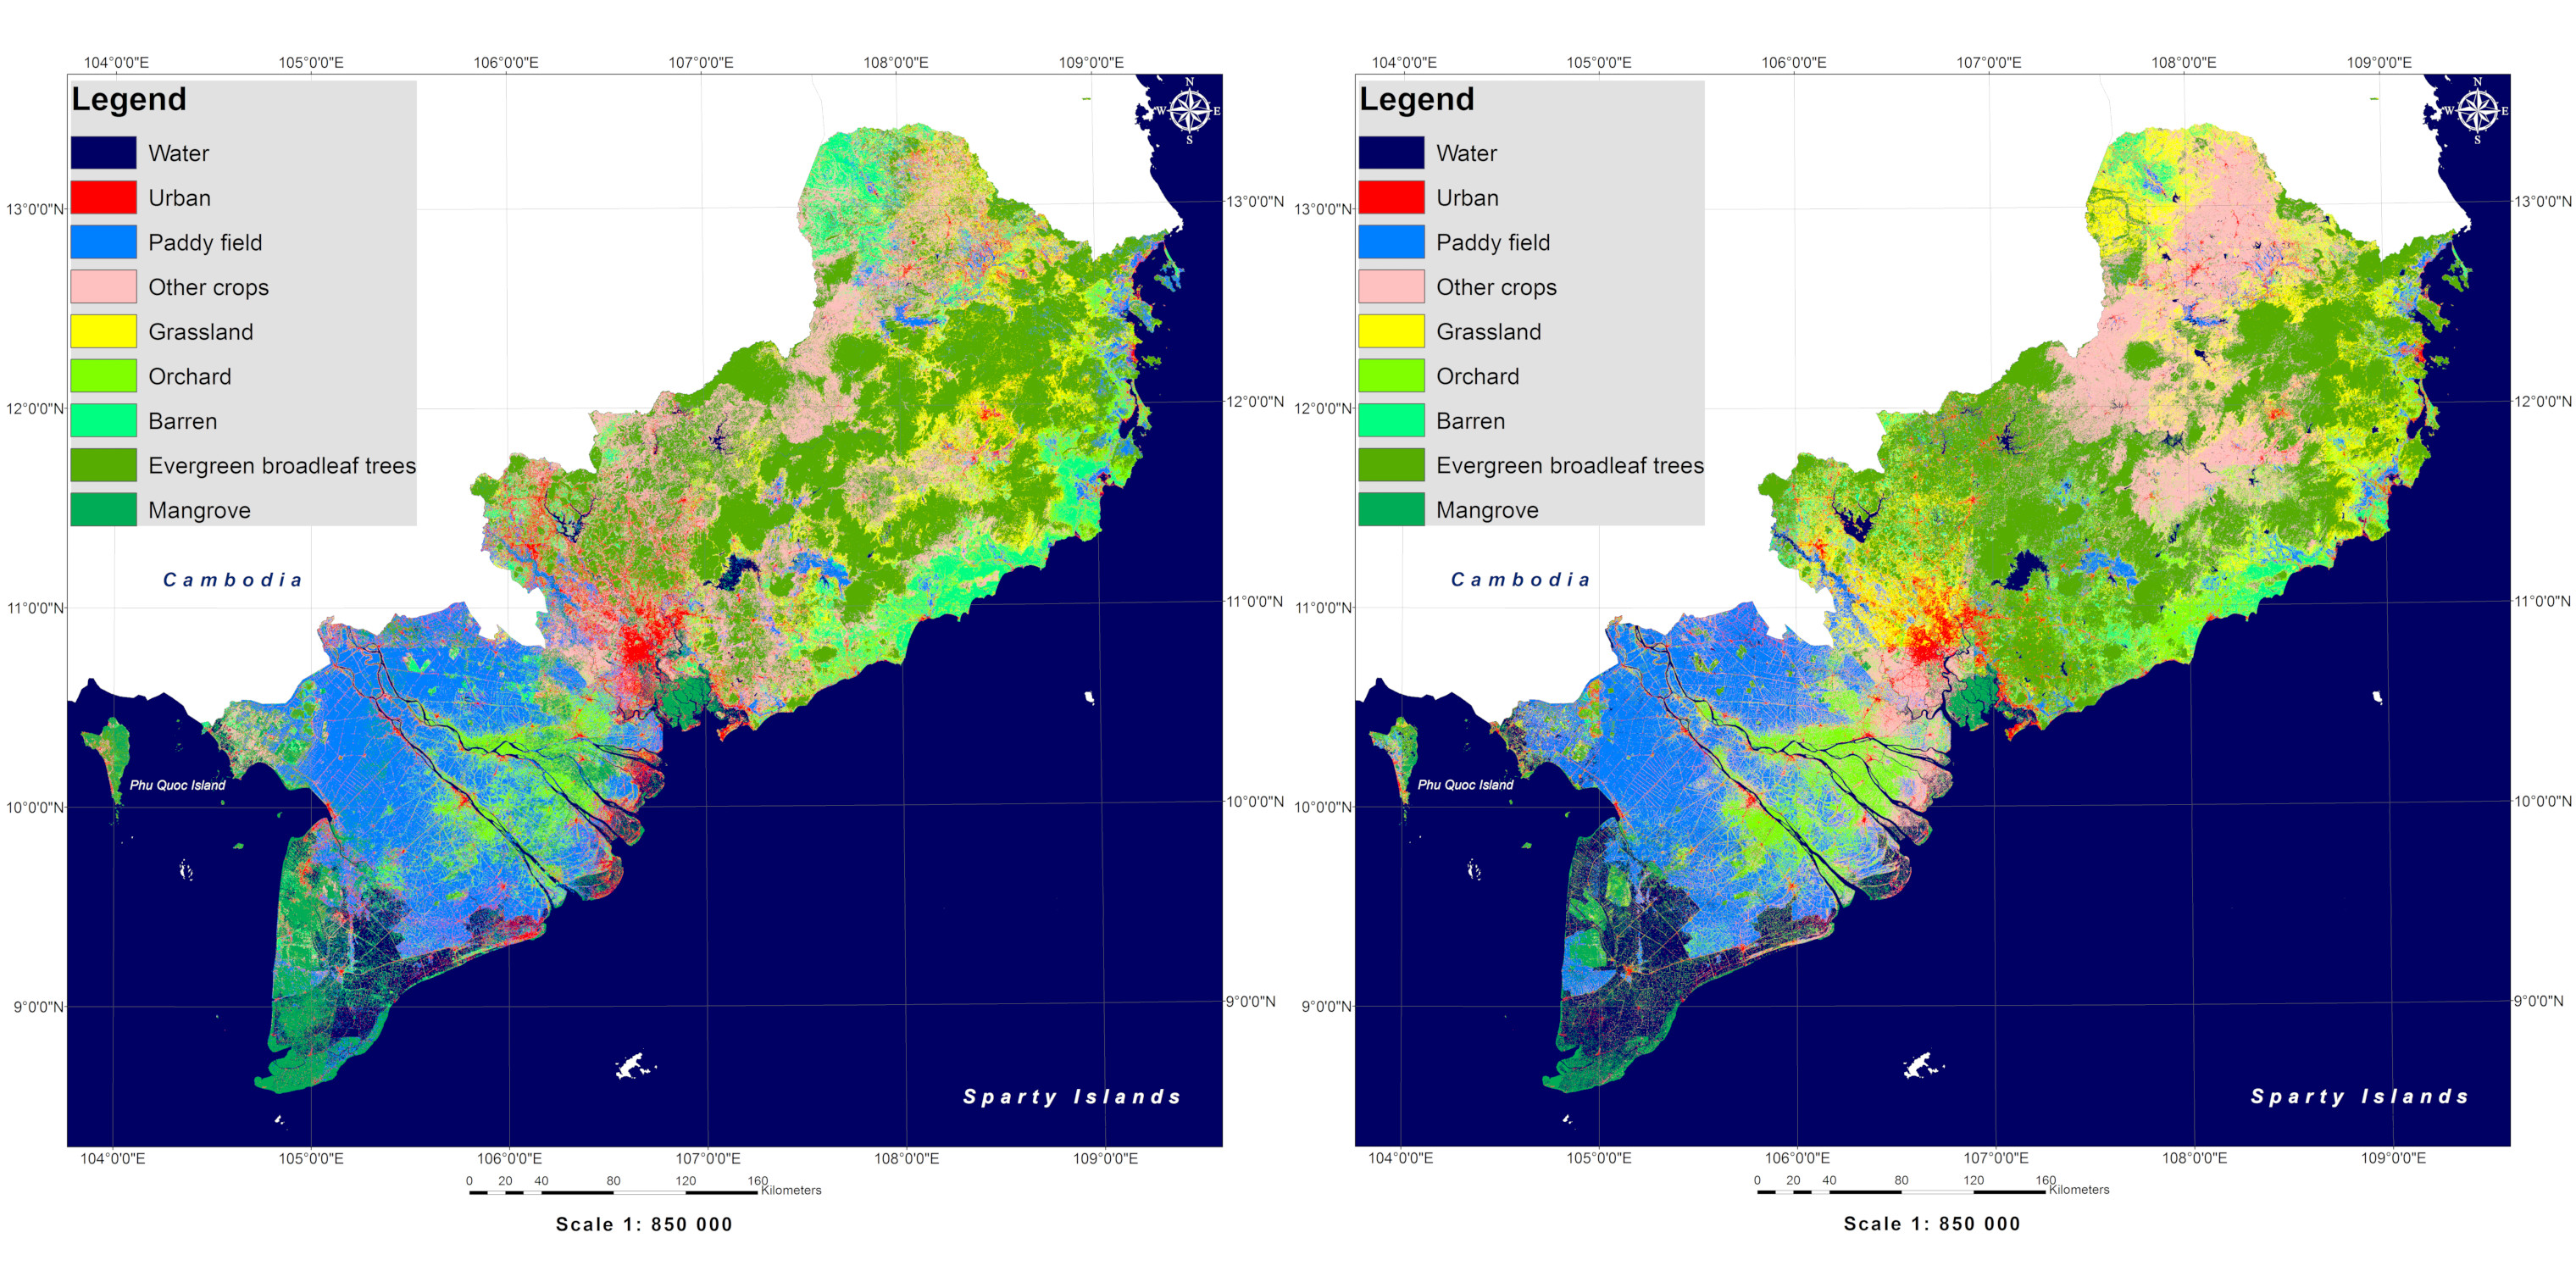 Figure 1: The 2007 land cover map (left) and the 2017 land cover map (right).